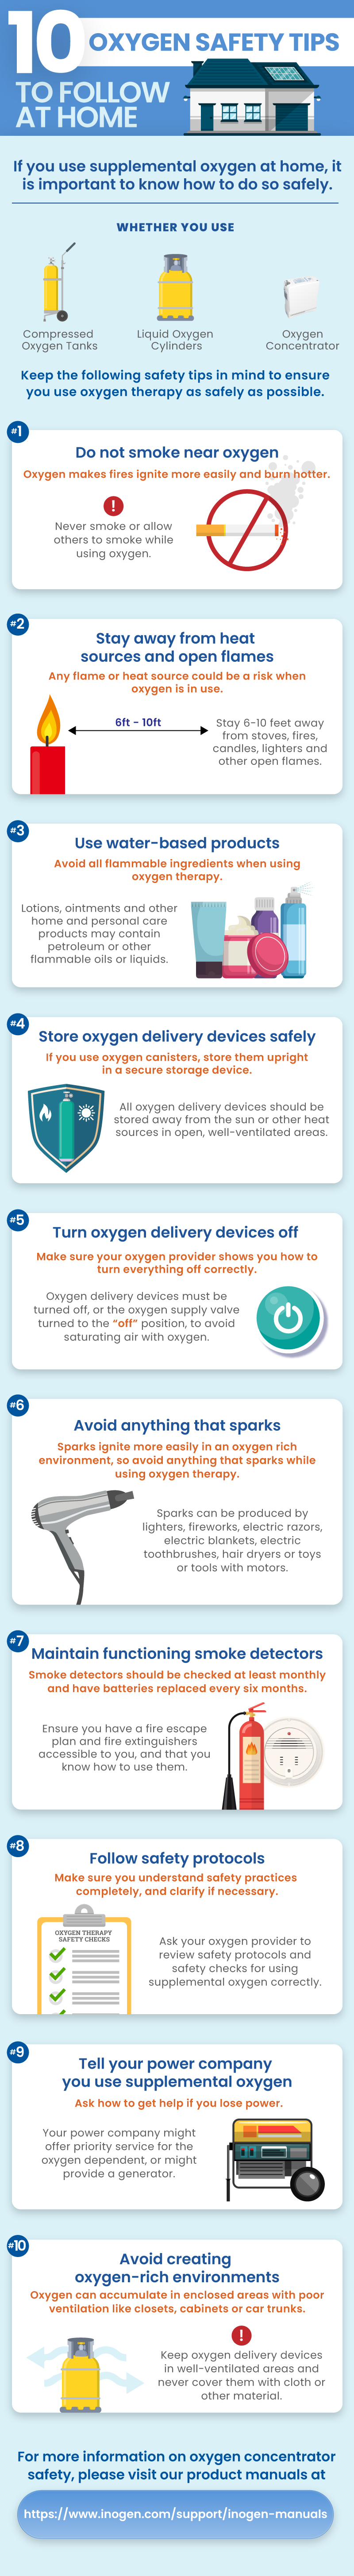 10 Oxygen Safety Tips to Follow at Home Infographic